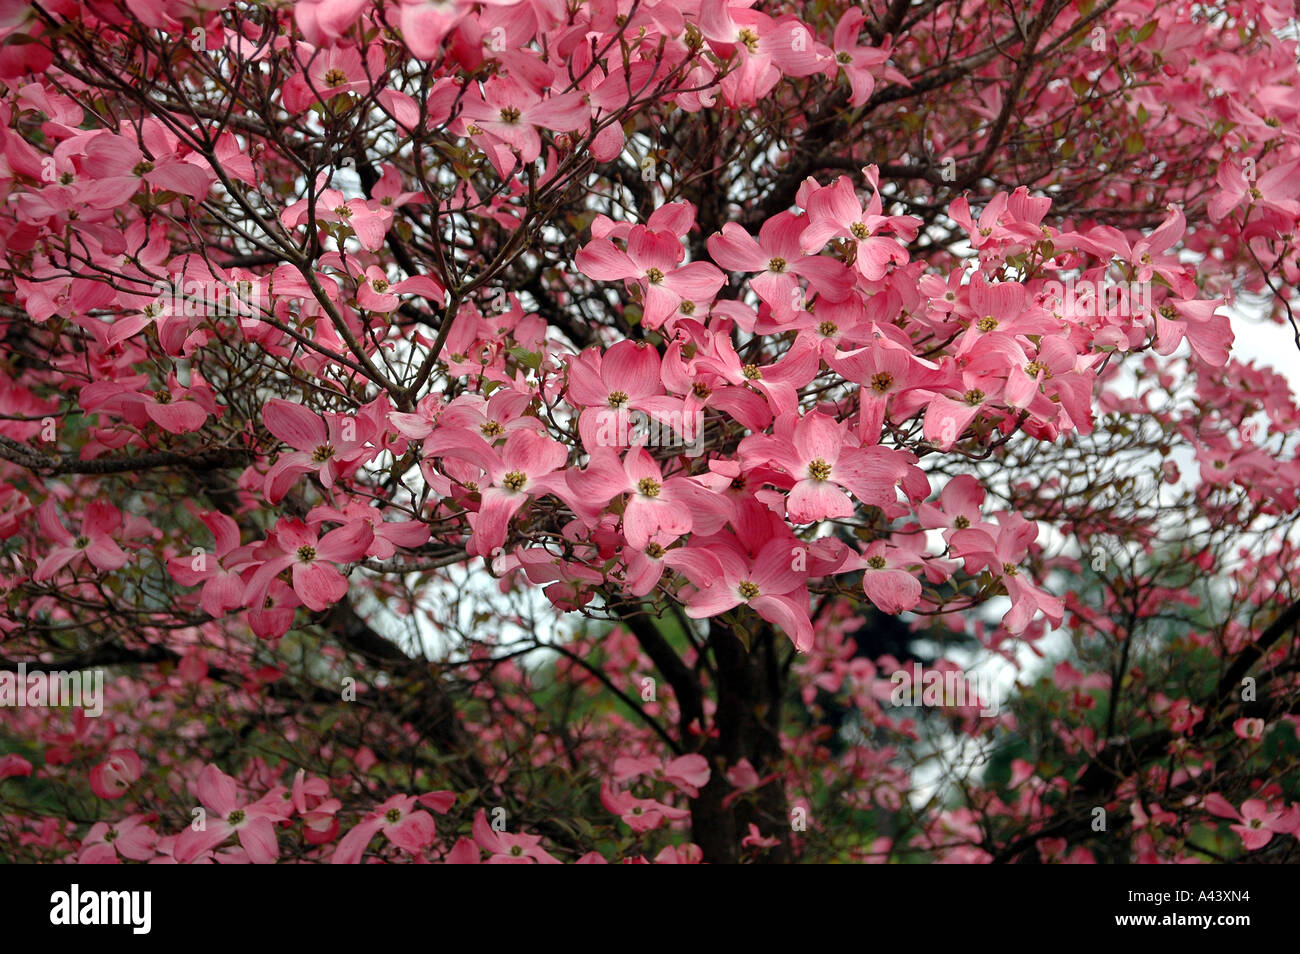 Flowers Blossoming On A Tree Stock Photo